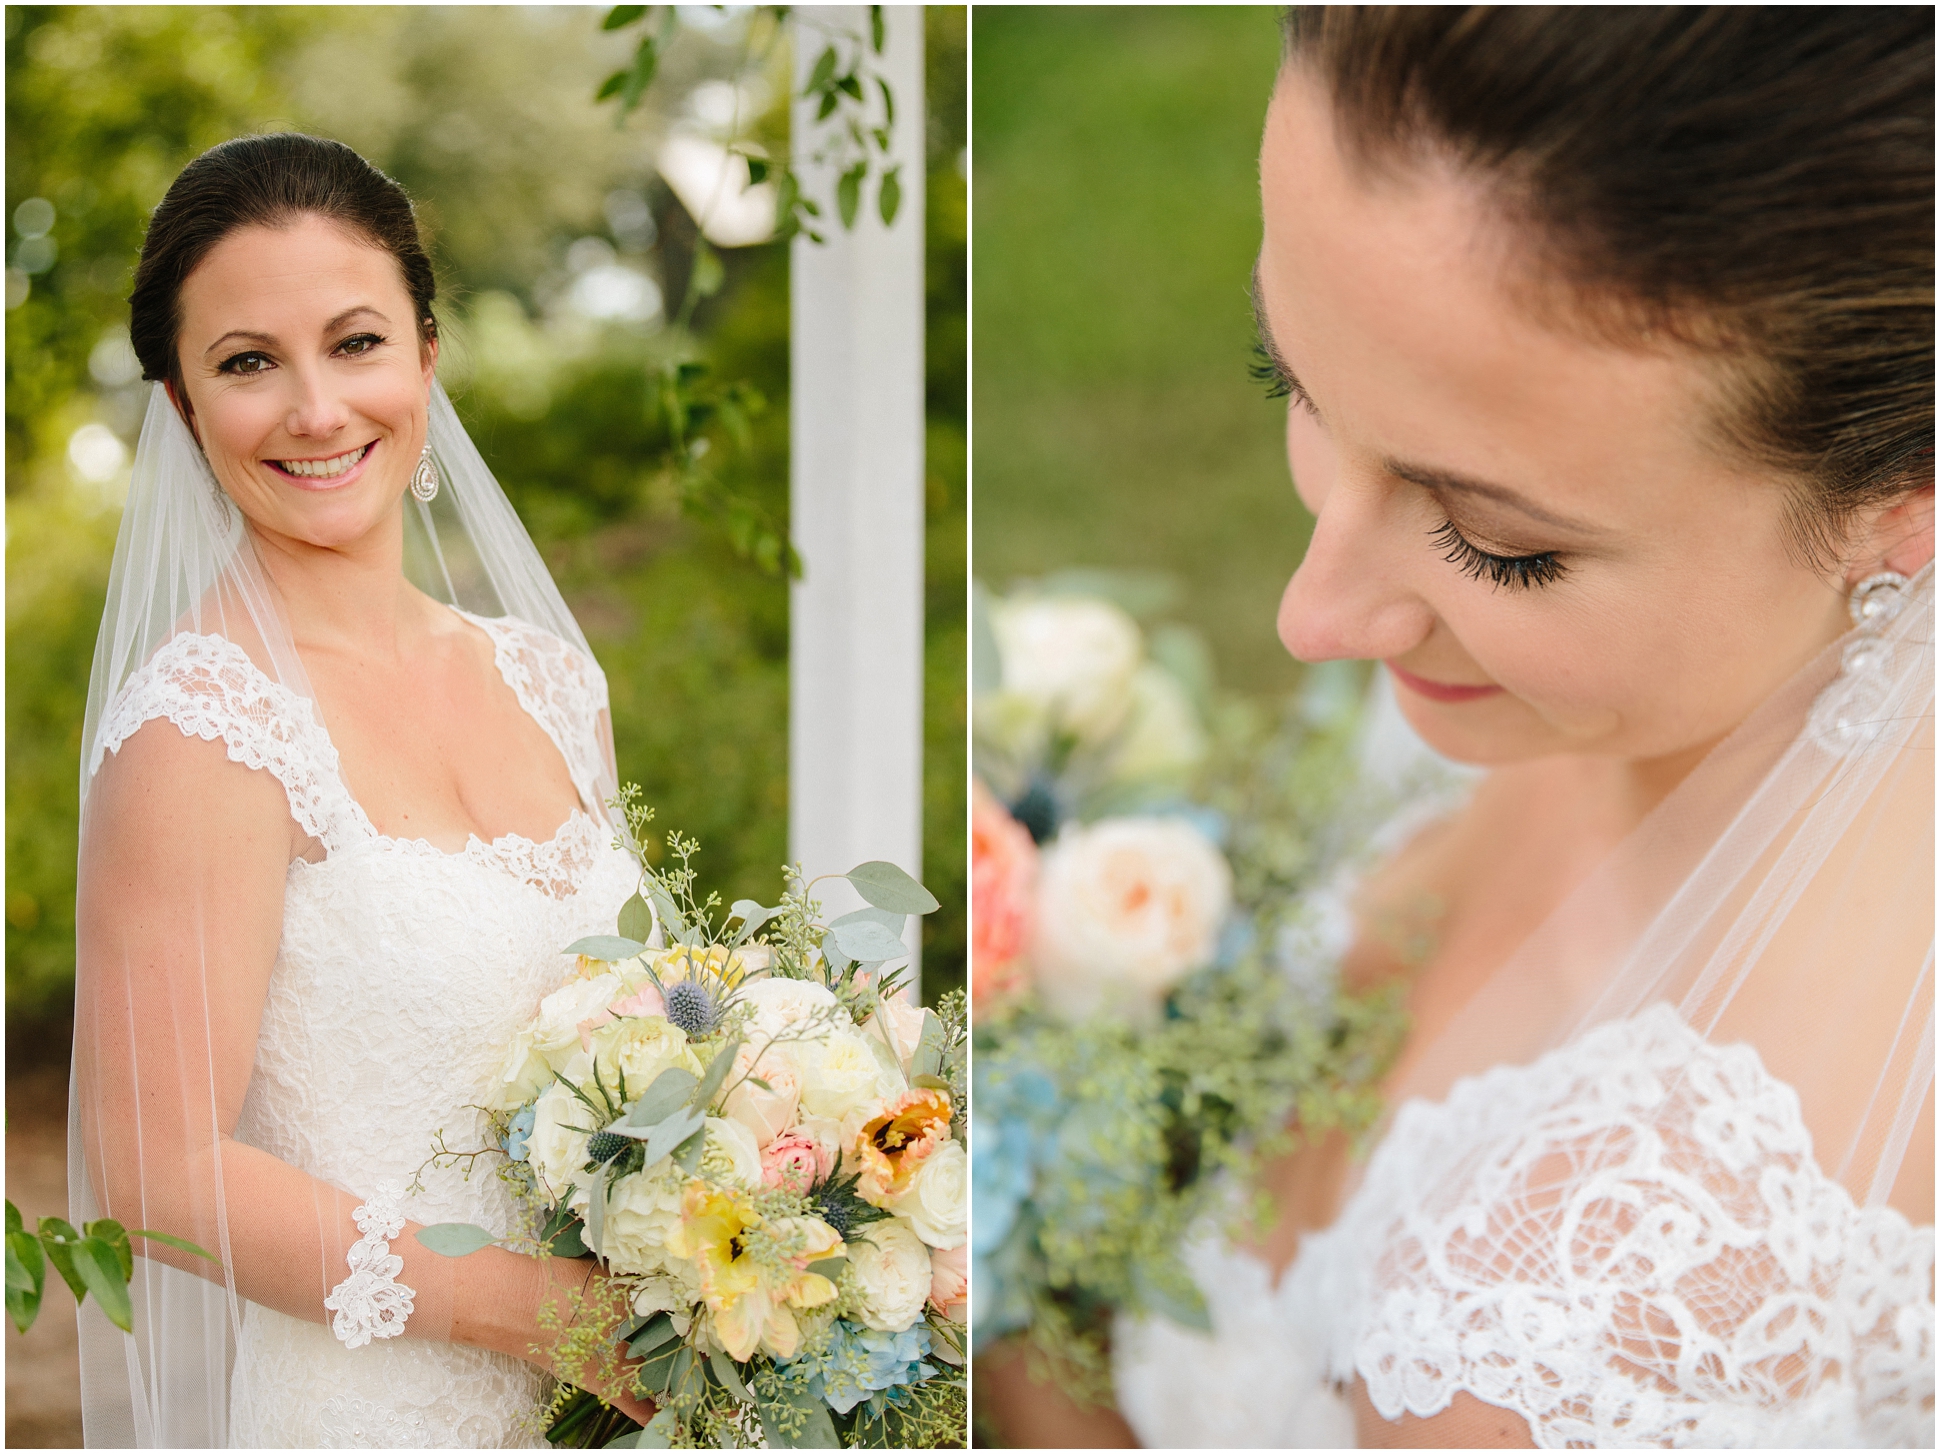 Two Chics Photography | The Corry House Wedding | www.twochicsphotography.com